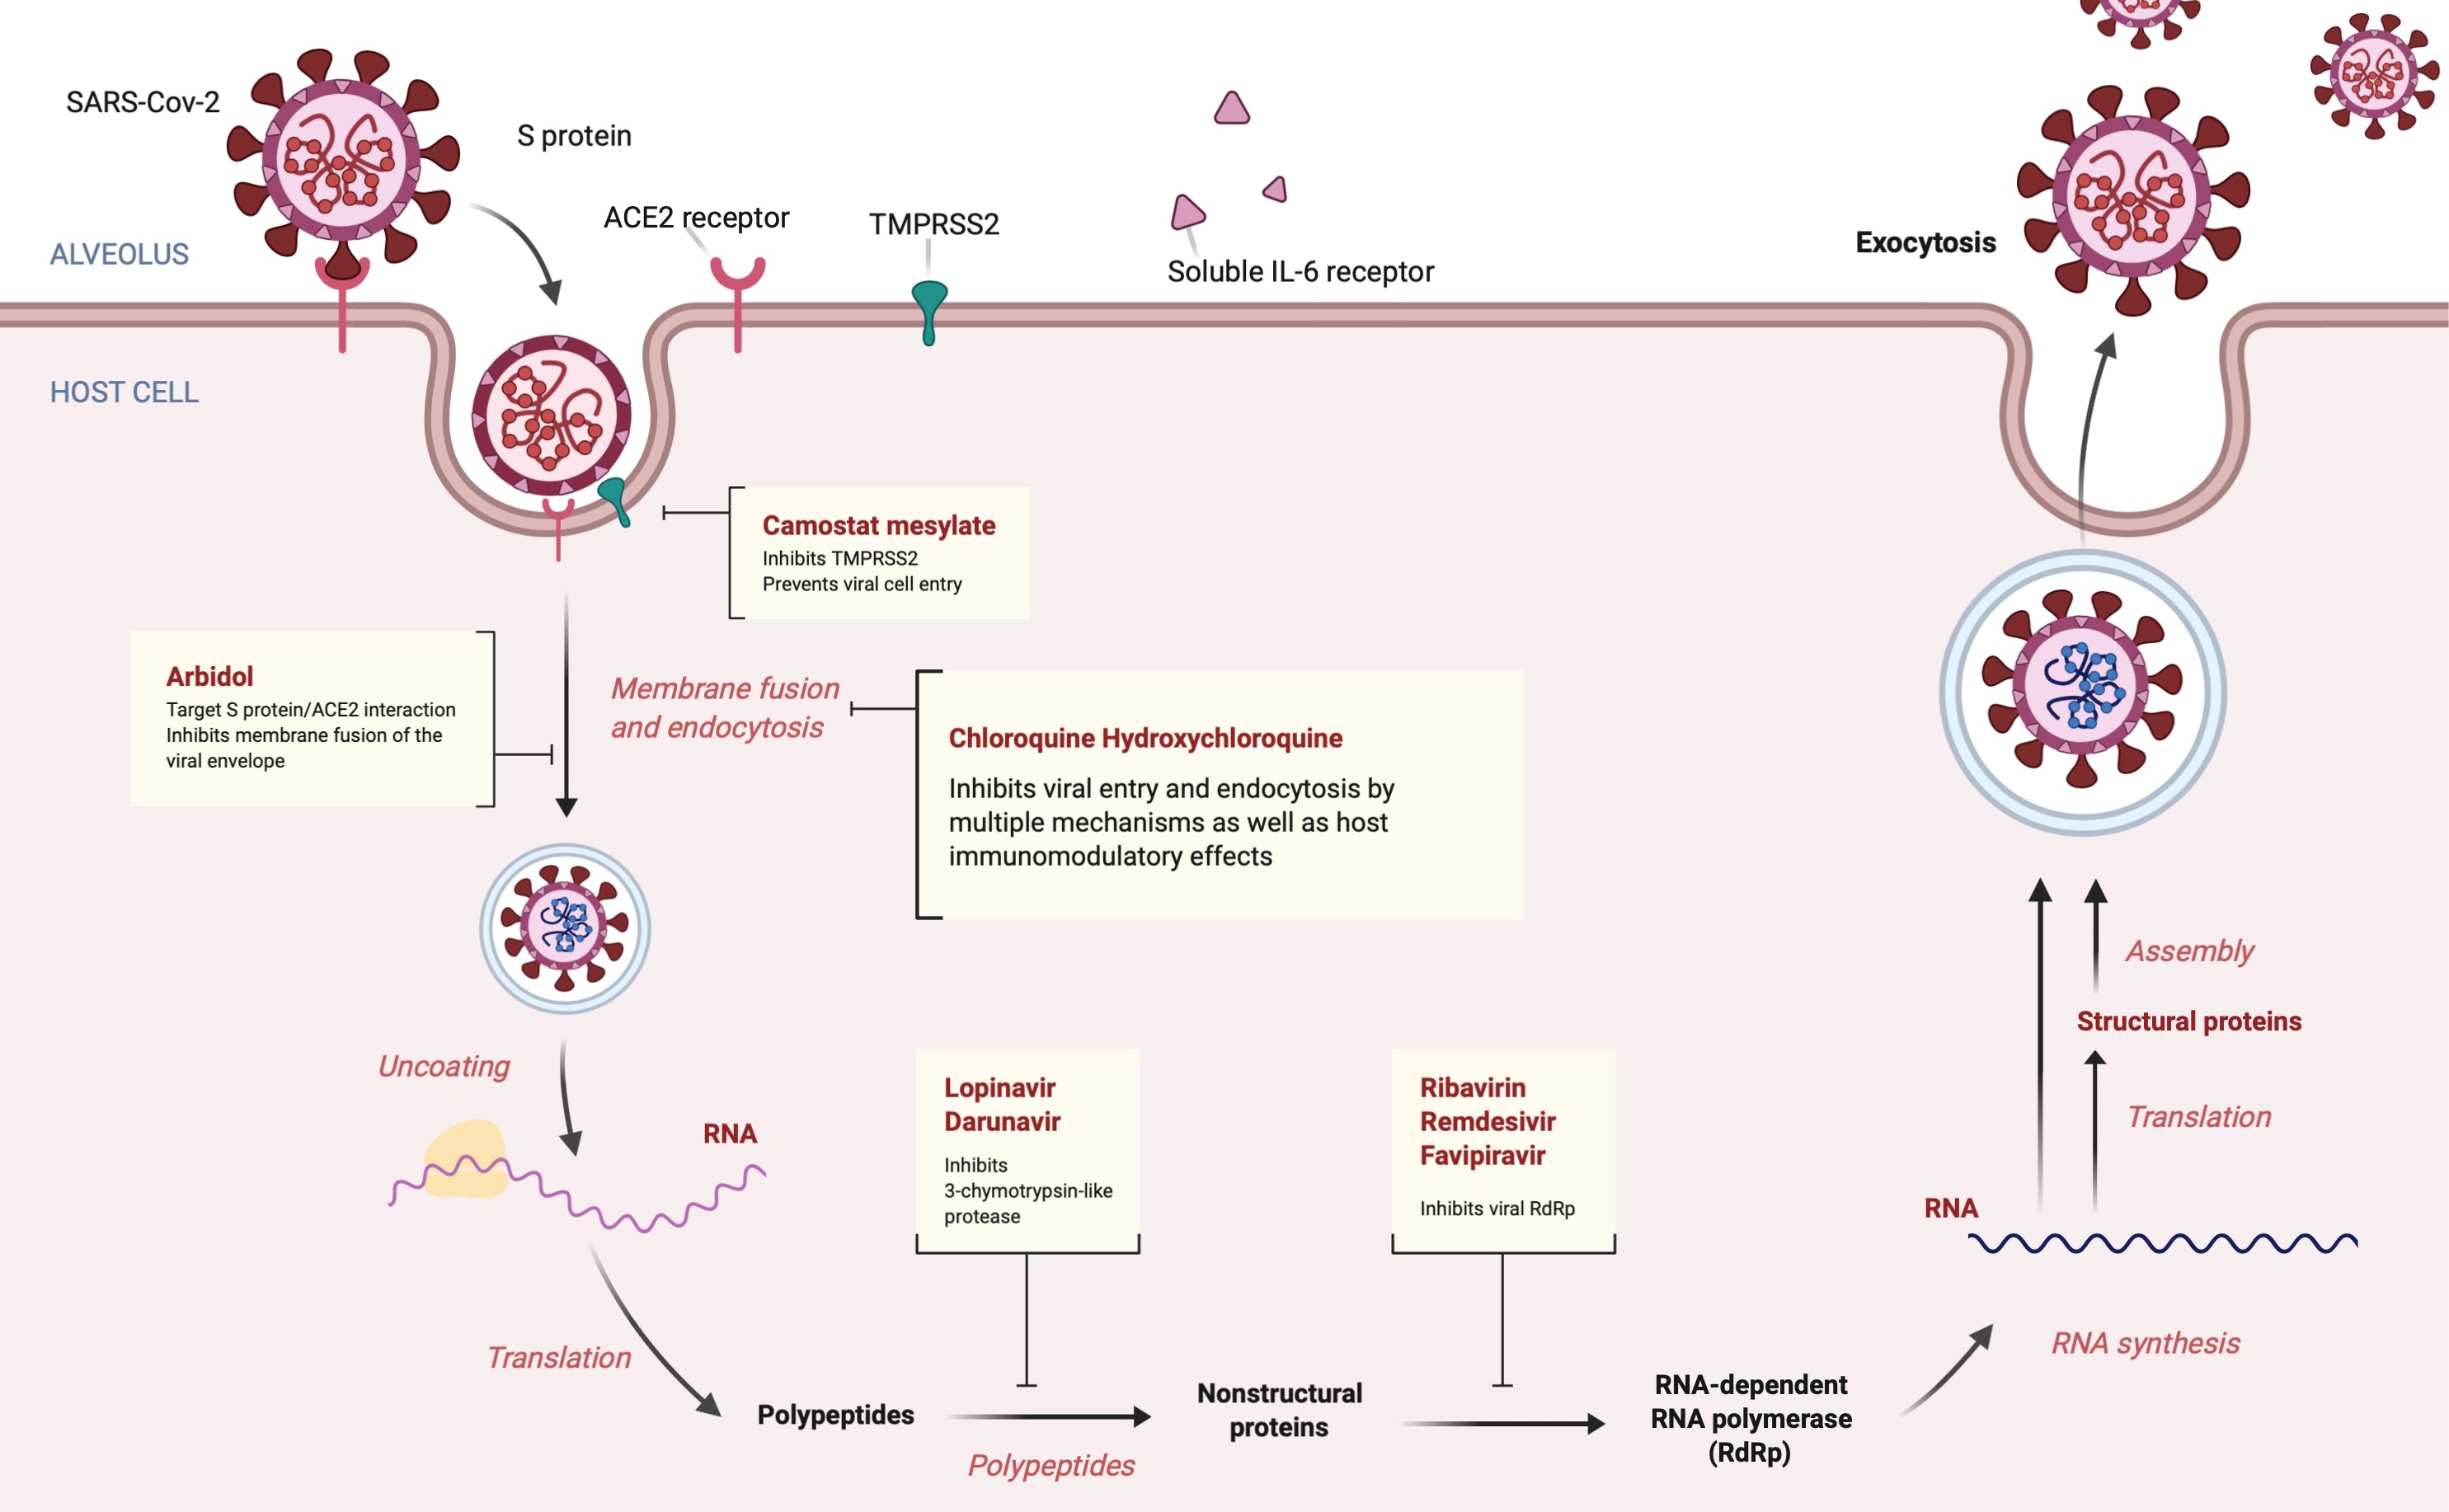 The process of SARS-CoV-2 infection